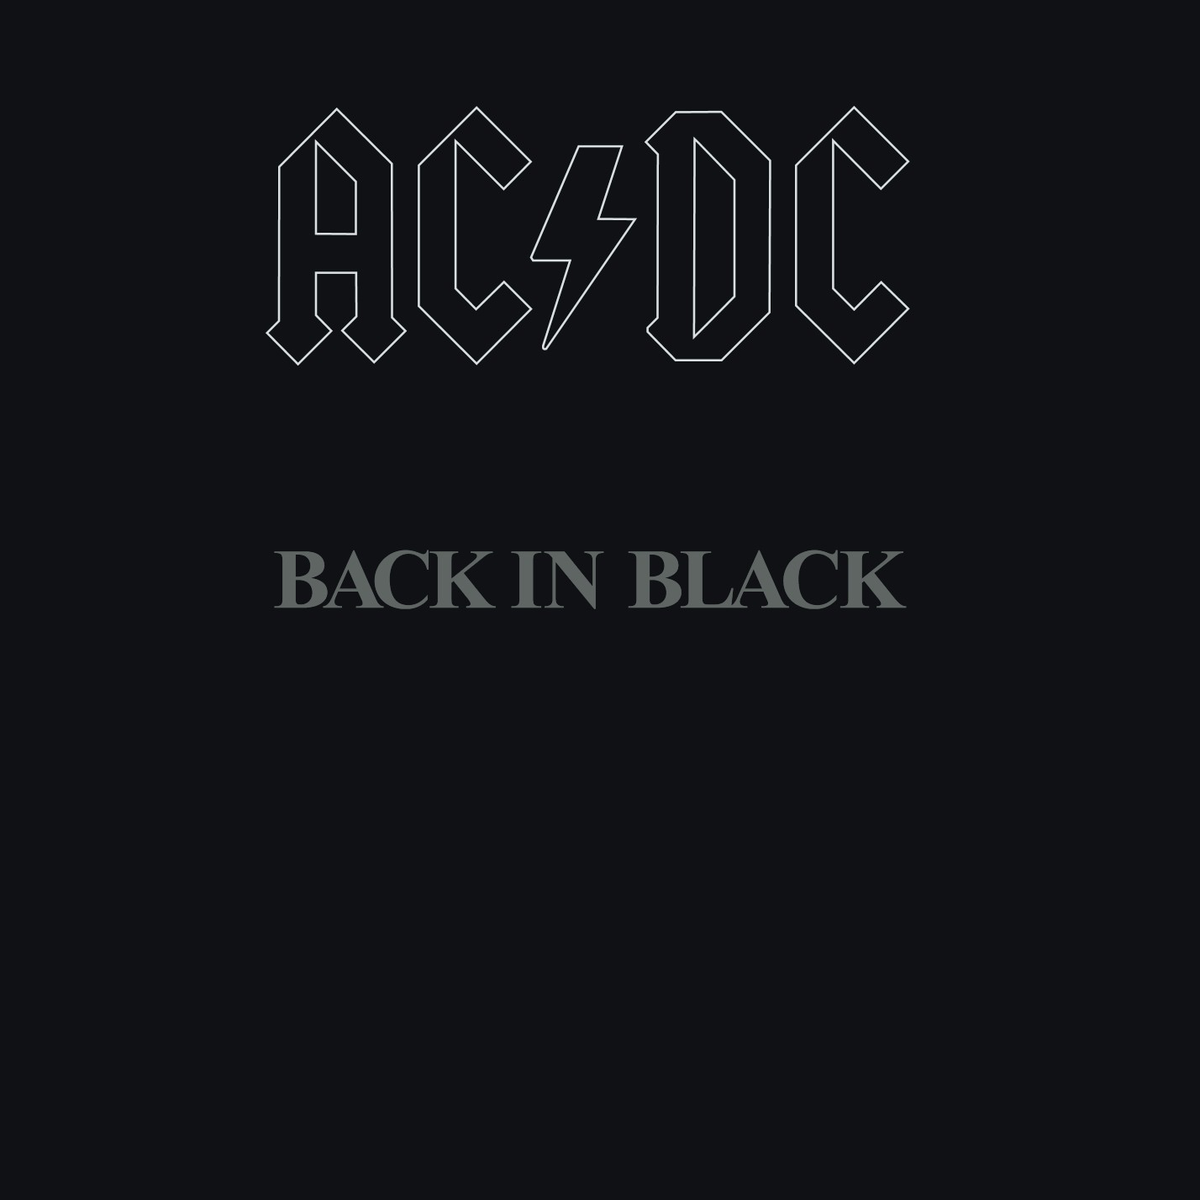 all time. It was the group's first recording with vocalist Brian Johnson, after Bon Scott died earlier in the year and the black album cover was meant as a tribute to Scott. More notes to come this weekend on this one.